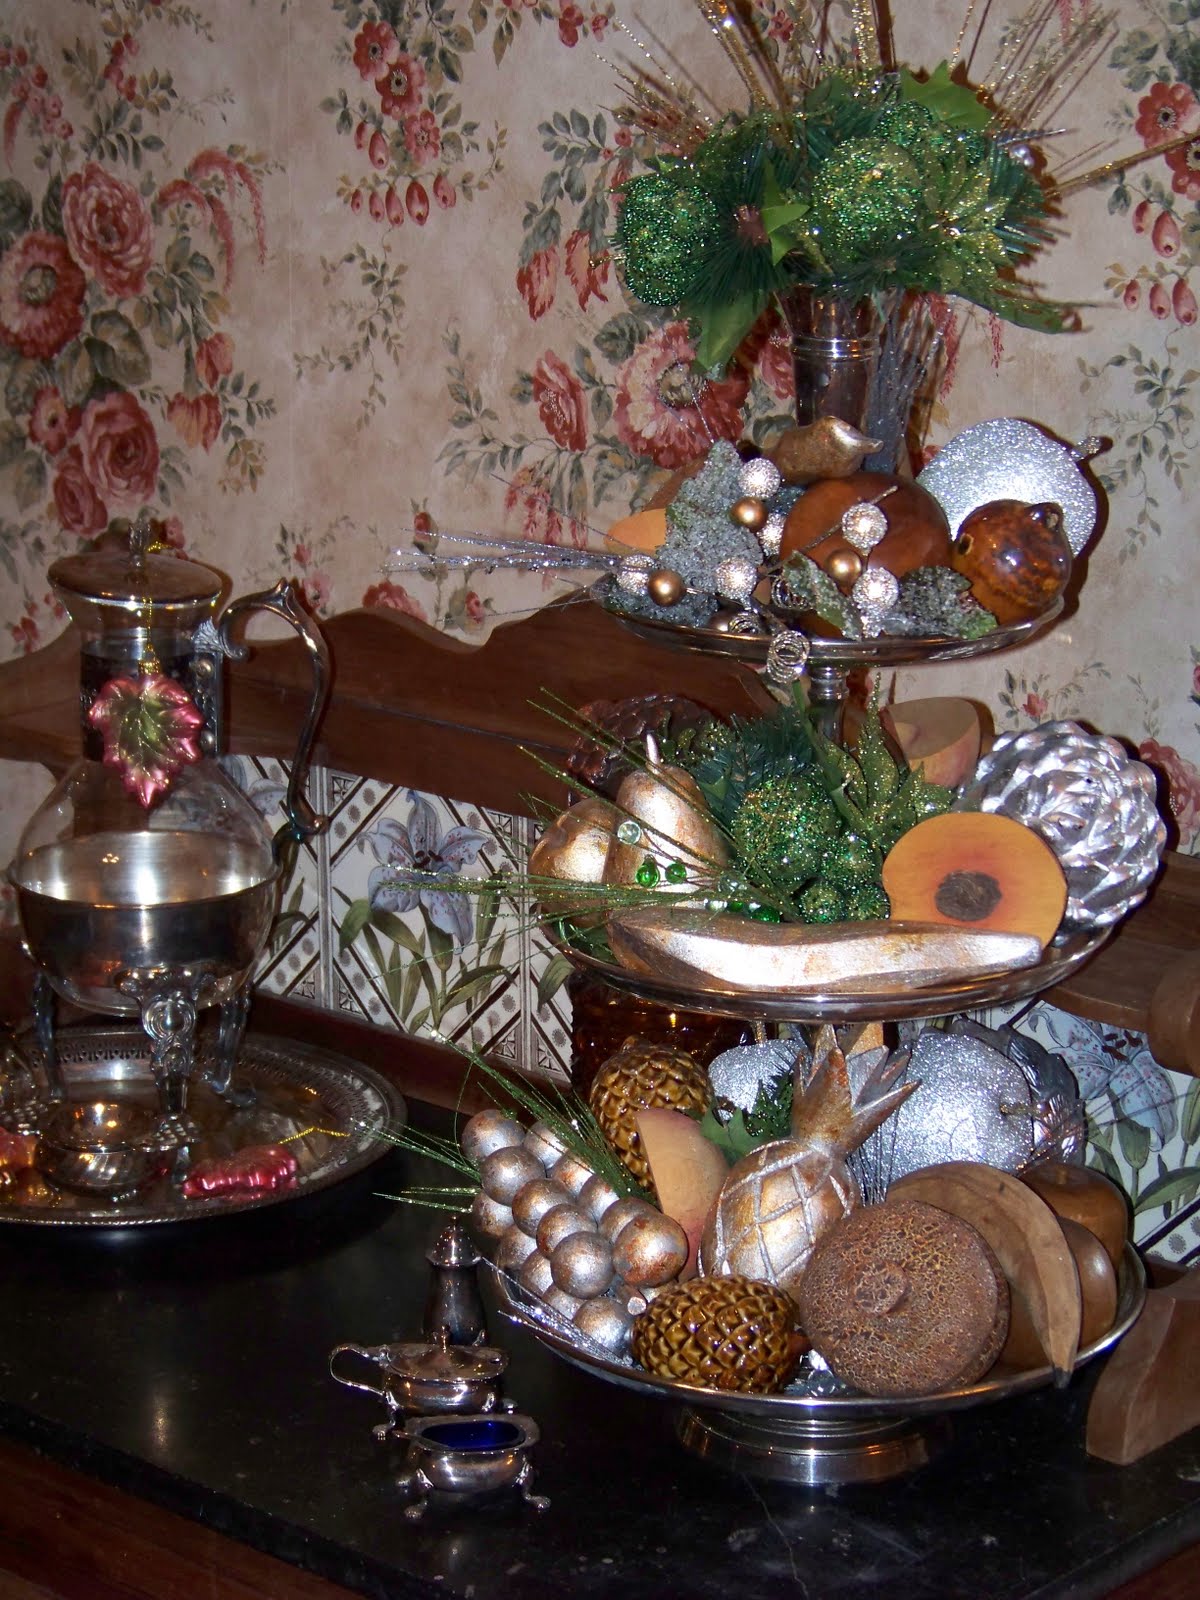 In a couple of days I will put up another post from the Holiday Tables 